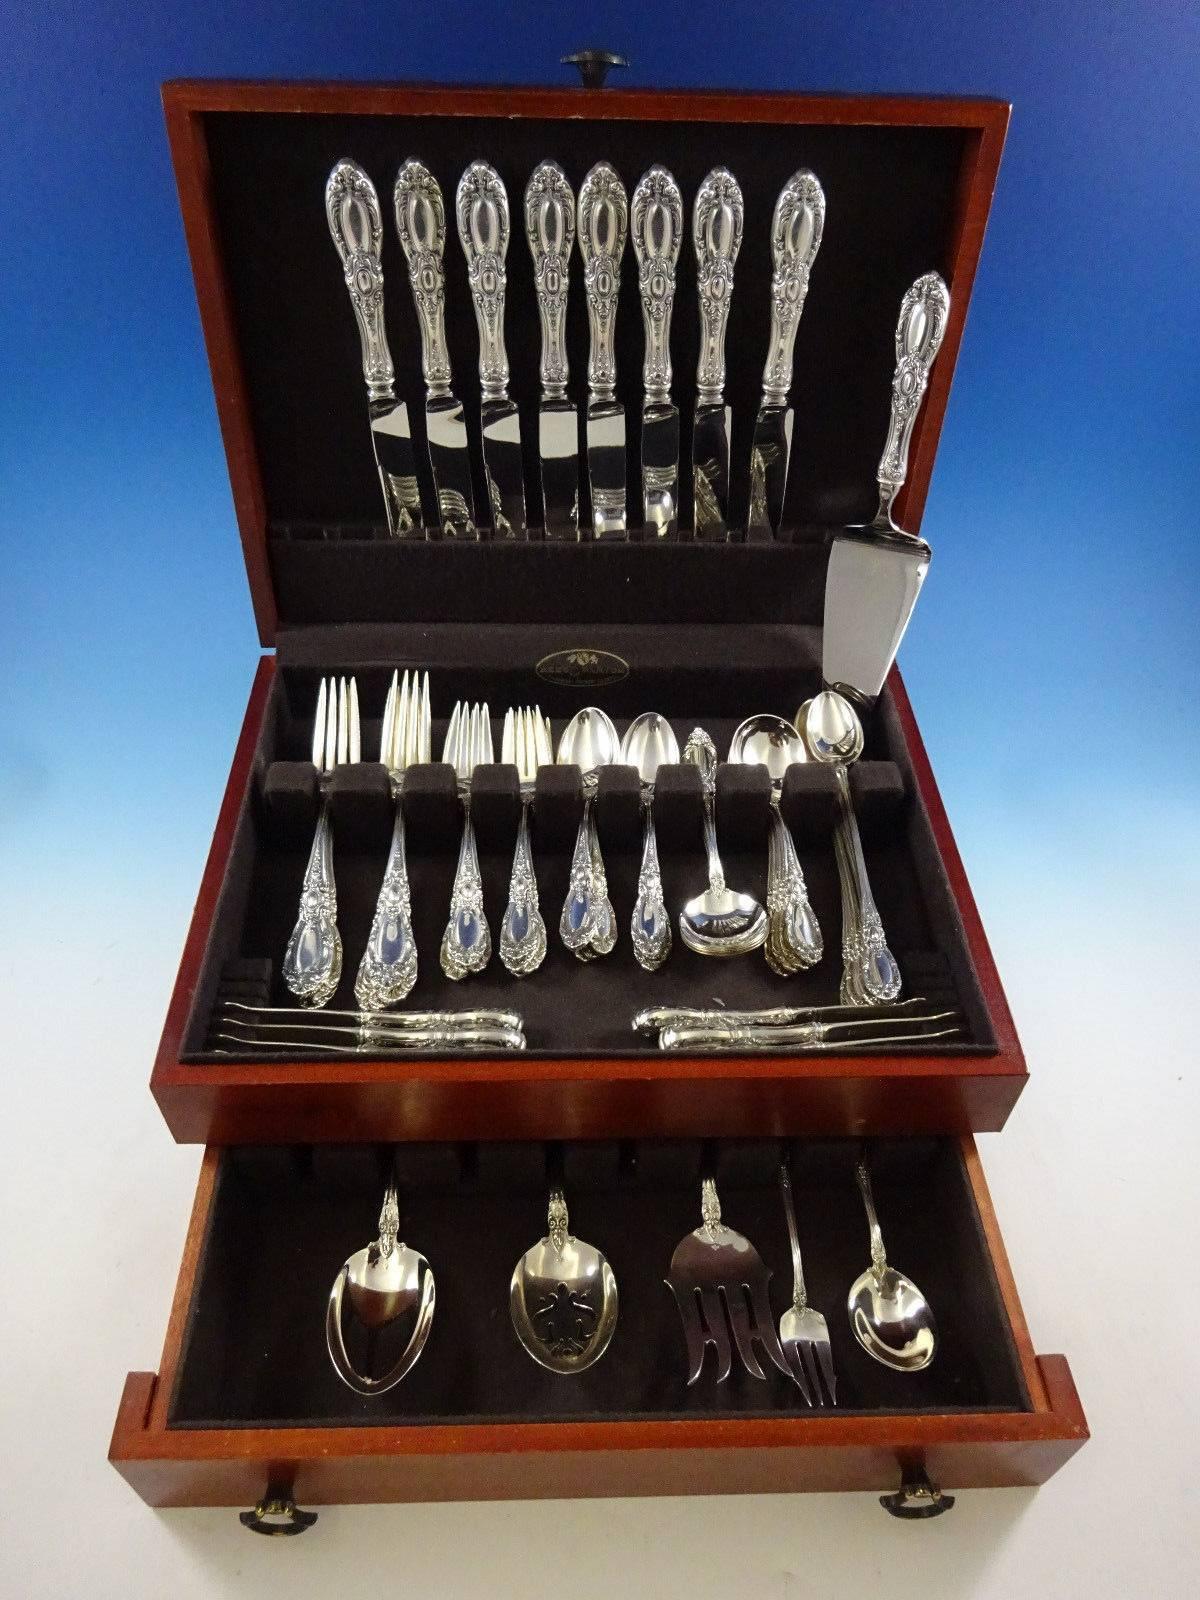 Dinner size king Richard by Towle sterling silver flatware set of 62 pieces. This set includes: 

eight dinner size knives, 9 3/4